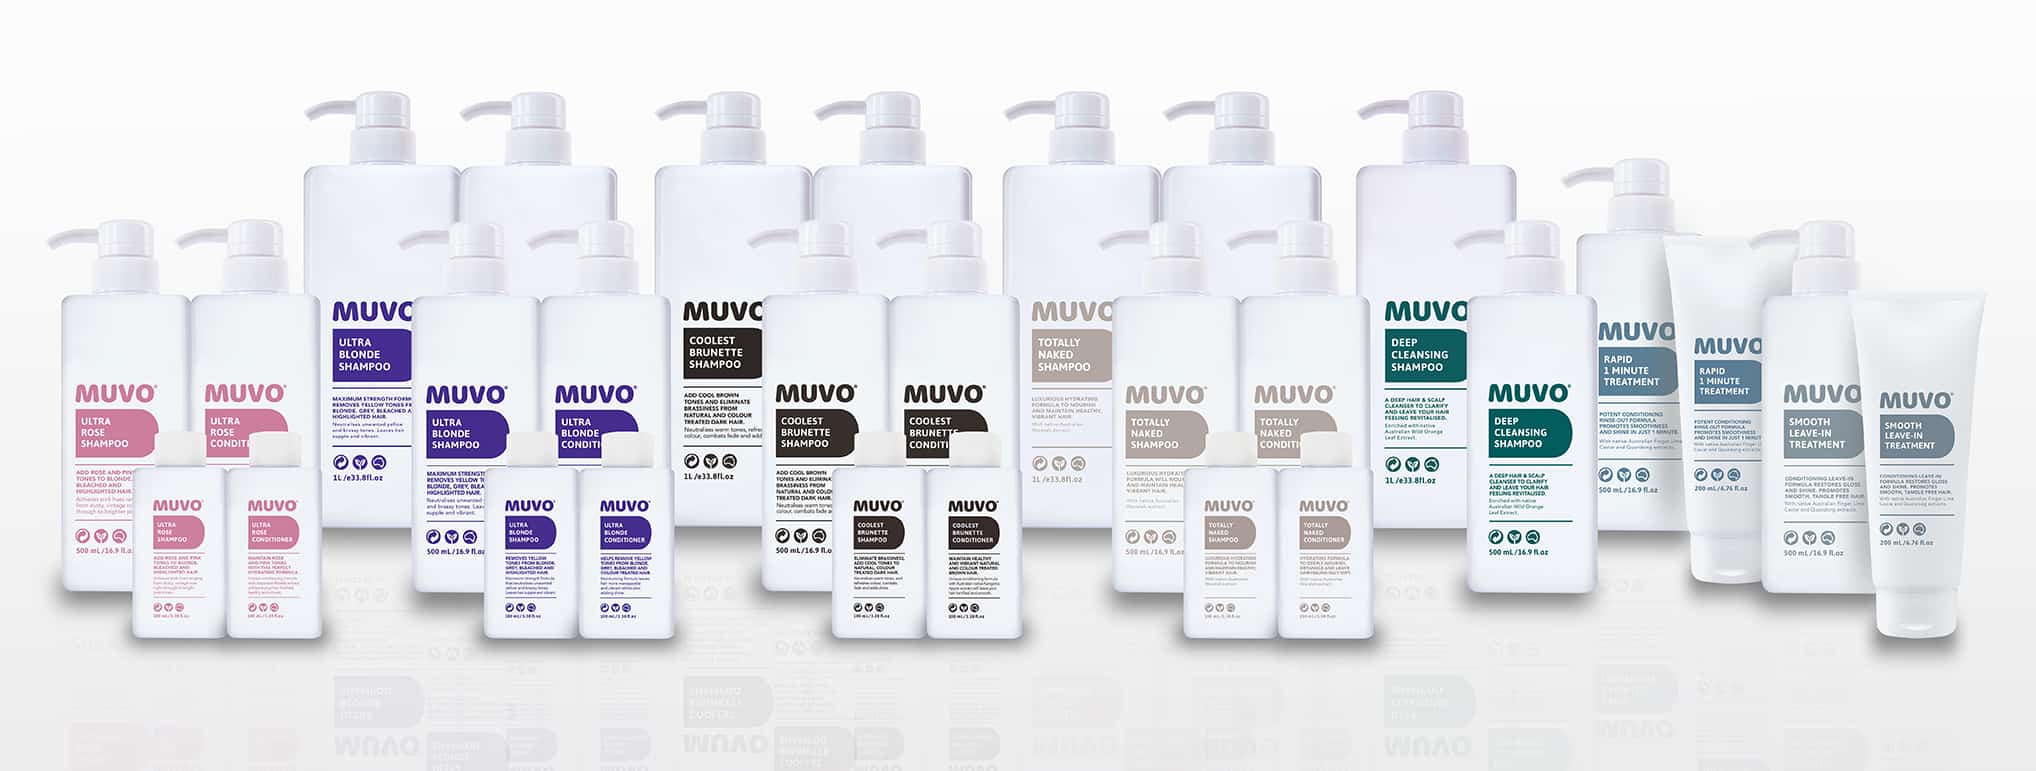 MUVO Family image showing all the products across all ranges